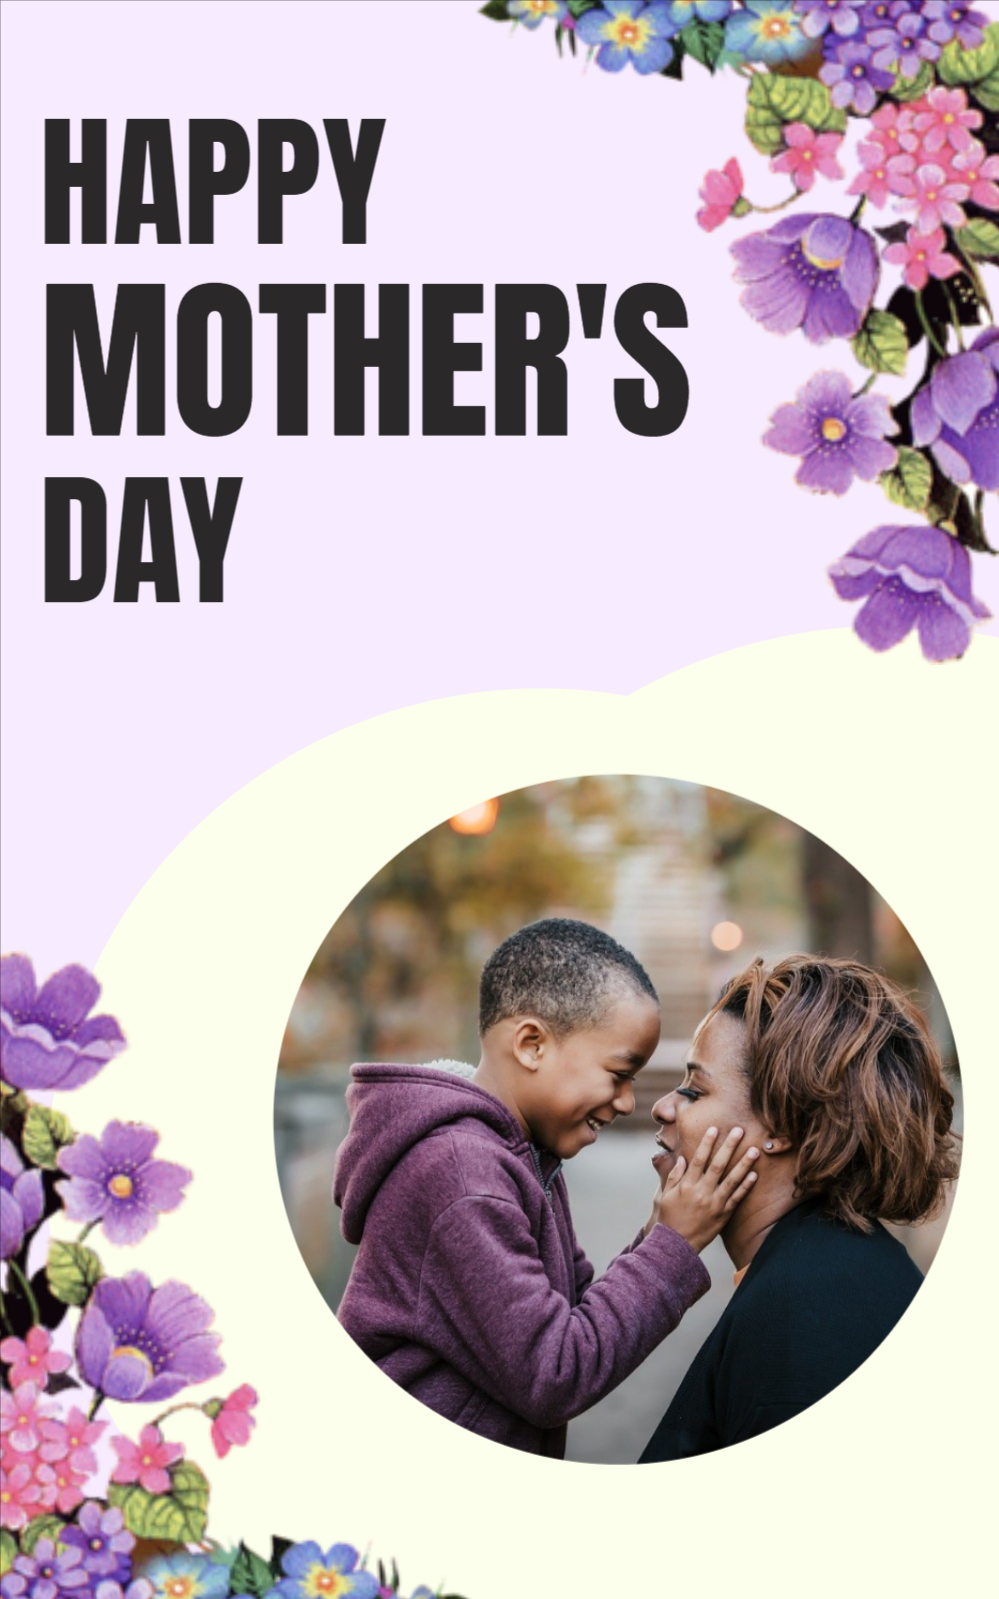 Happy Mother's Day Wishes Greeting With Photo Template